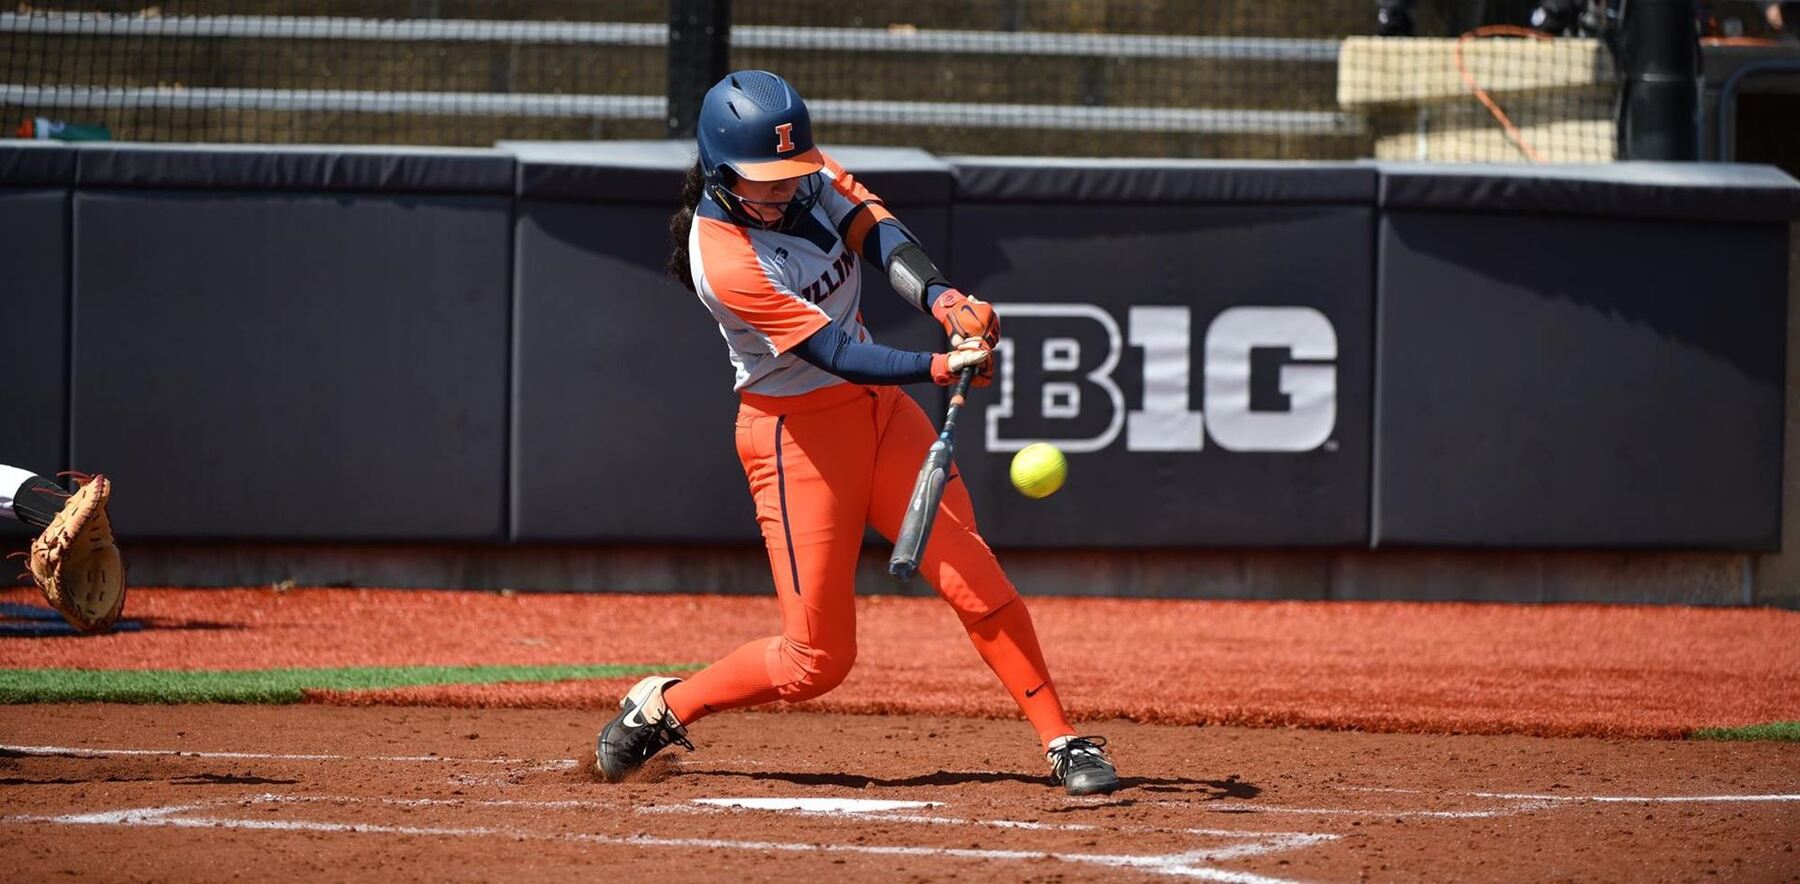 an Illini player's swing capture just before she connects with the ball